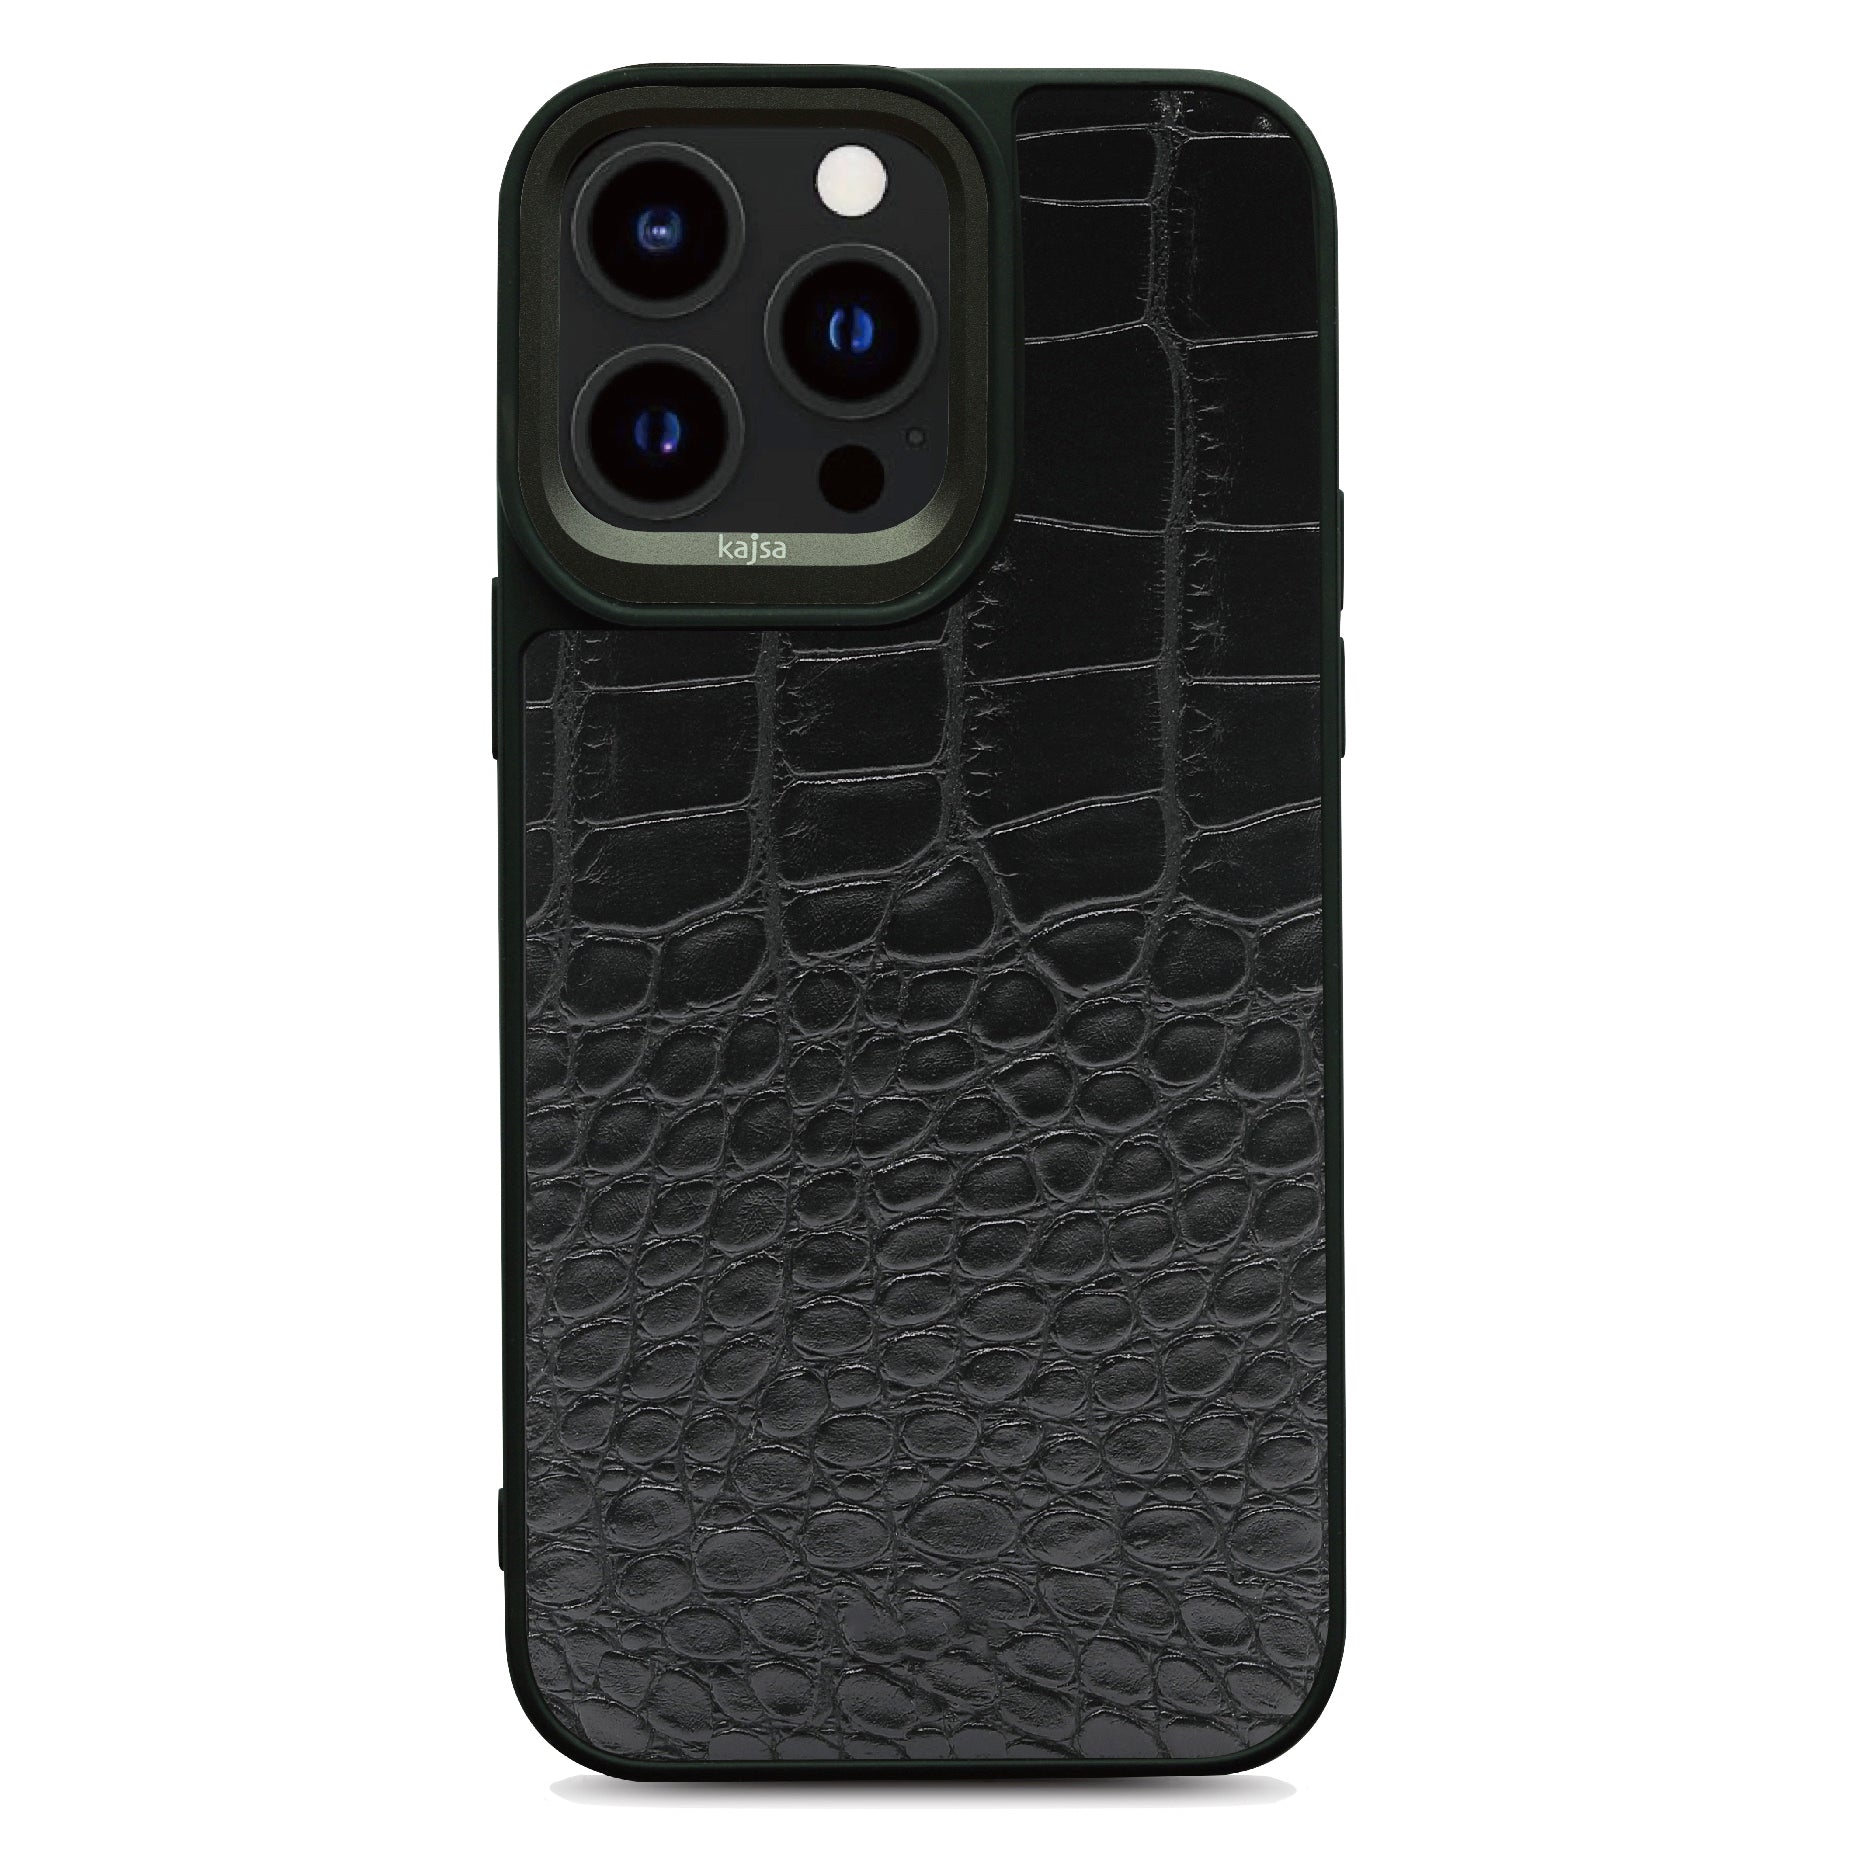 Glamorous Collection - Croco II Back Case for iPhone 14-Phone Case- phone case - phone cases- phone cover- iphone cover- iphone case- iphone cases- leather case- leather cases- DIYCASE - custom case - leather cover - hand strap case - croco pattern case - snake pattern case - carbon fiber phone case - phone case brand - unique phone case - high quality - phone case brand - protective case - buy phone case hong kong - online buy phone case - iphone‎手機殼 - 客製化手機殼 - samsung ‎手機殼 - 香港手機殼 - 買電話殼